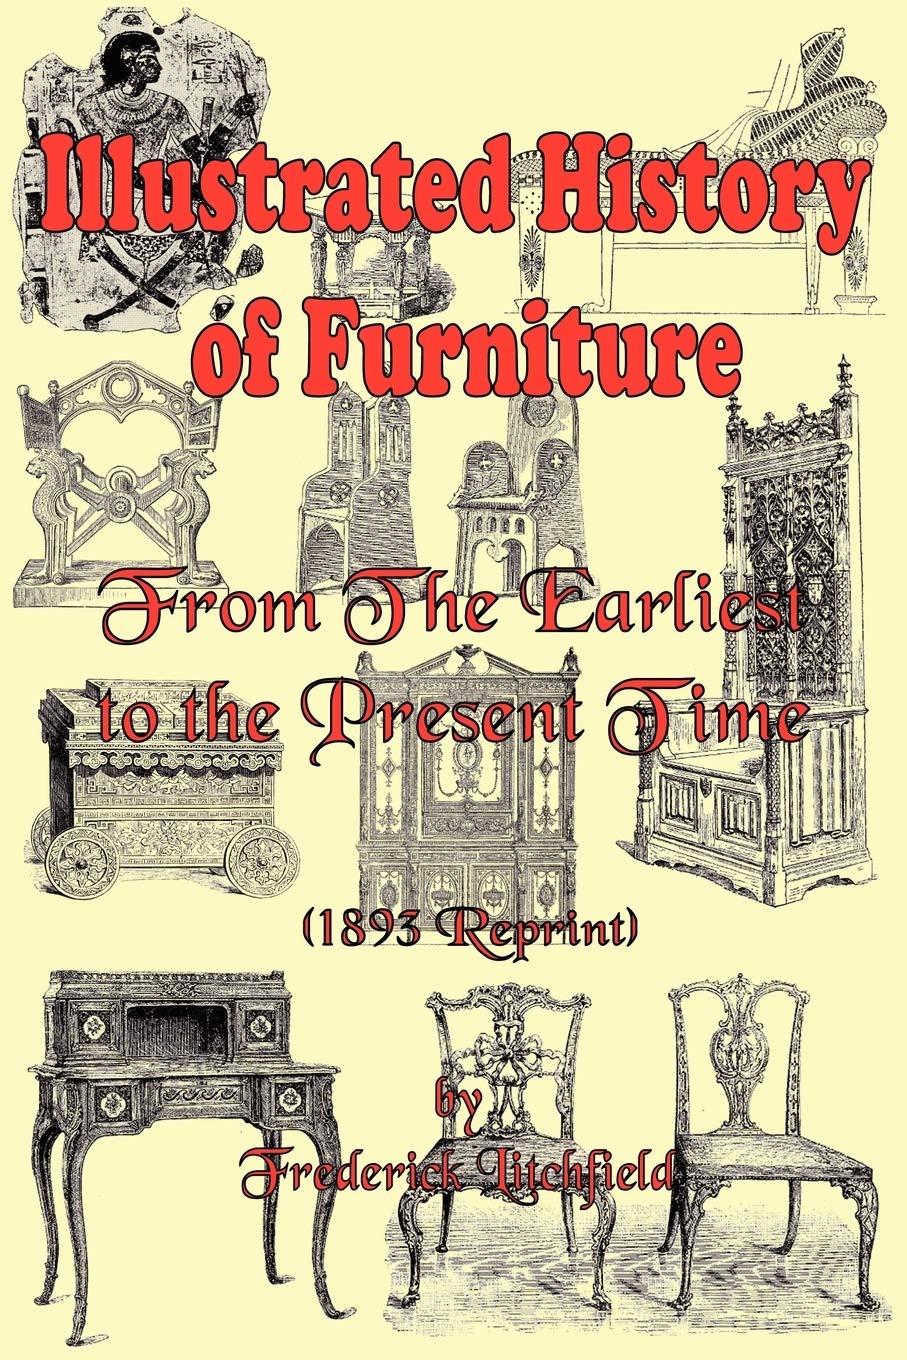 Fredericka Litchfielda "Illustrated History of Furniture: From the Earliest to the Present Time" okładka tył